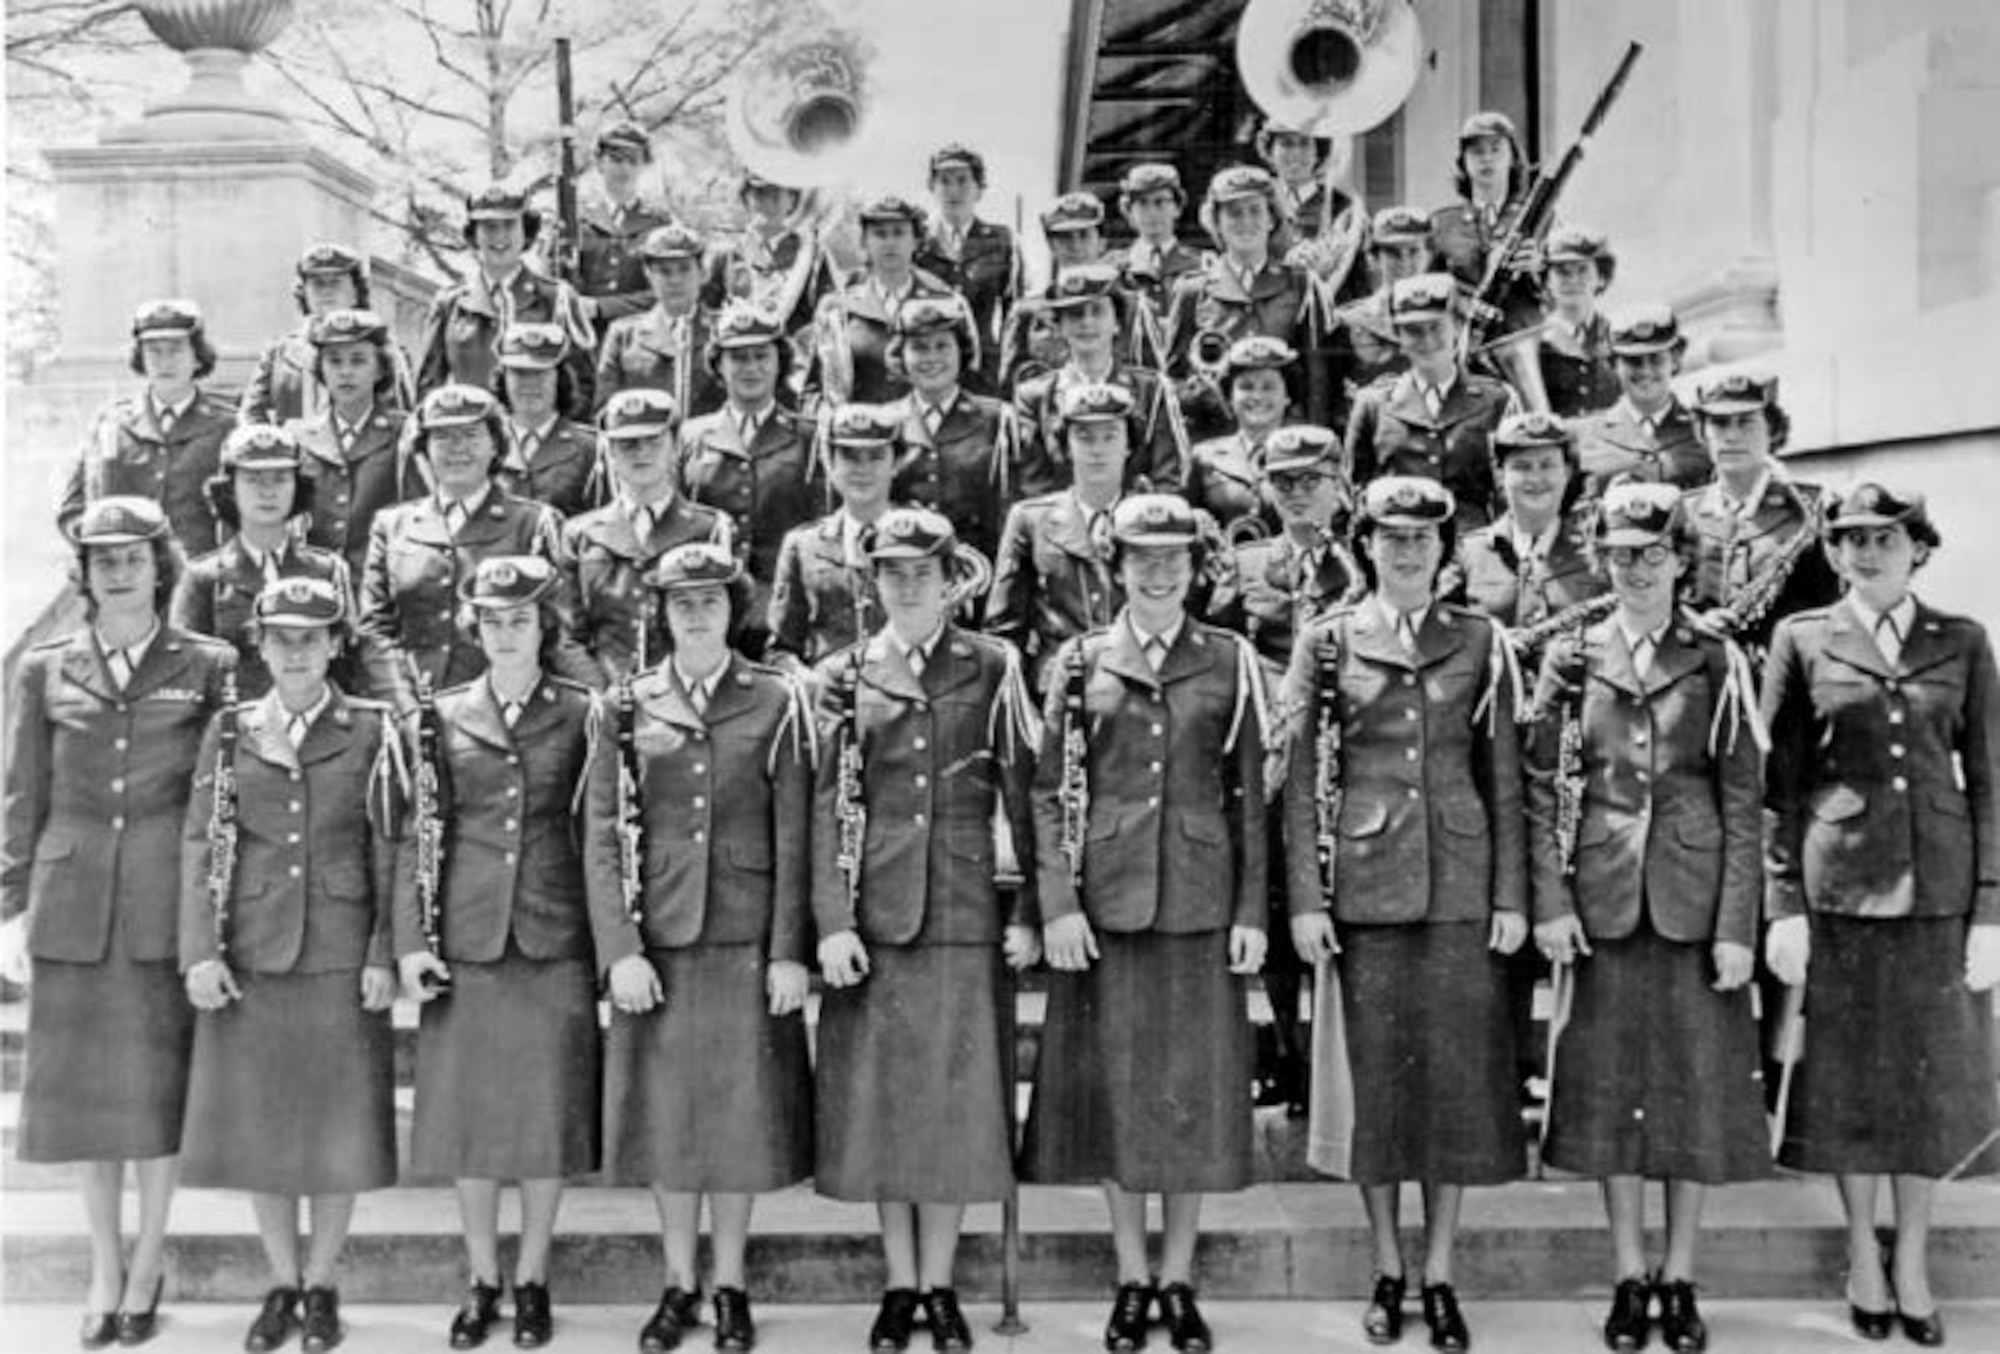 The Women in the Air Force Band at U.S. Air Force Band School at Bolling Air Force Base in Washington, D.C., in the early 1950s. (Courtesy photo)